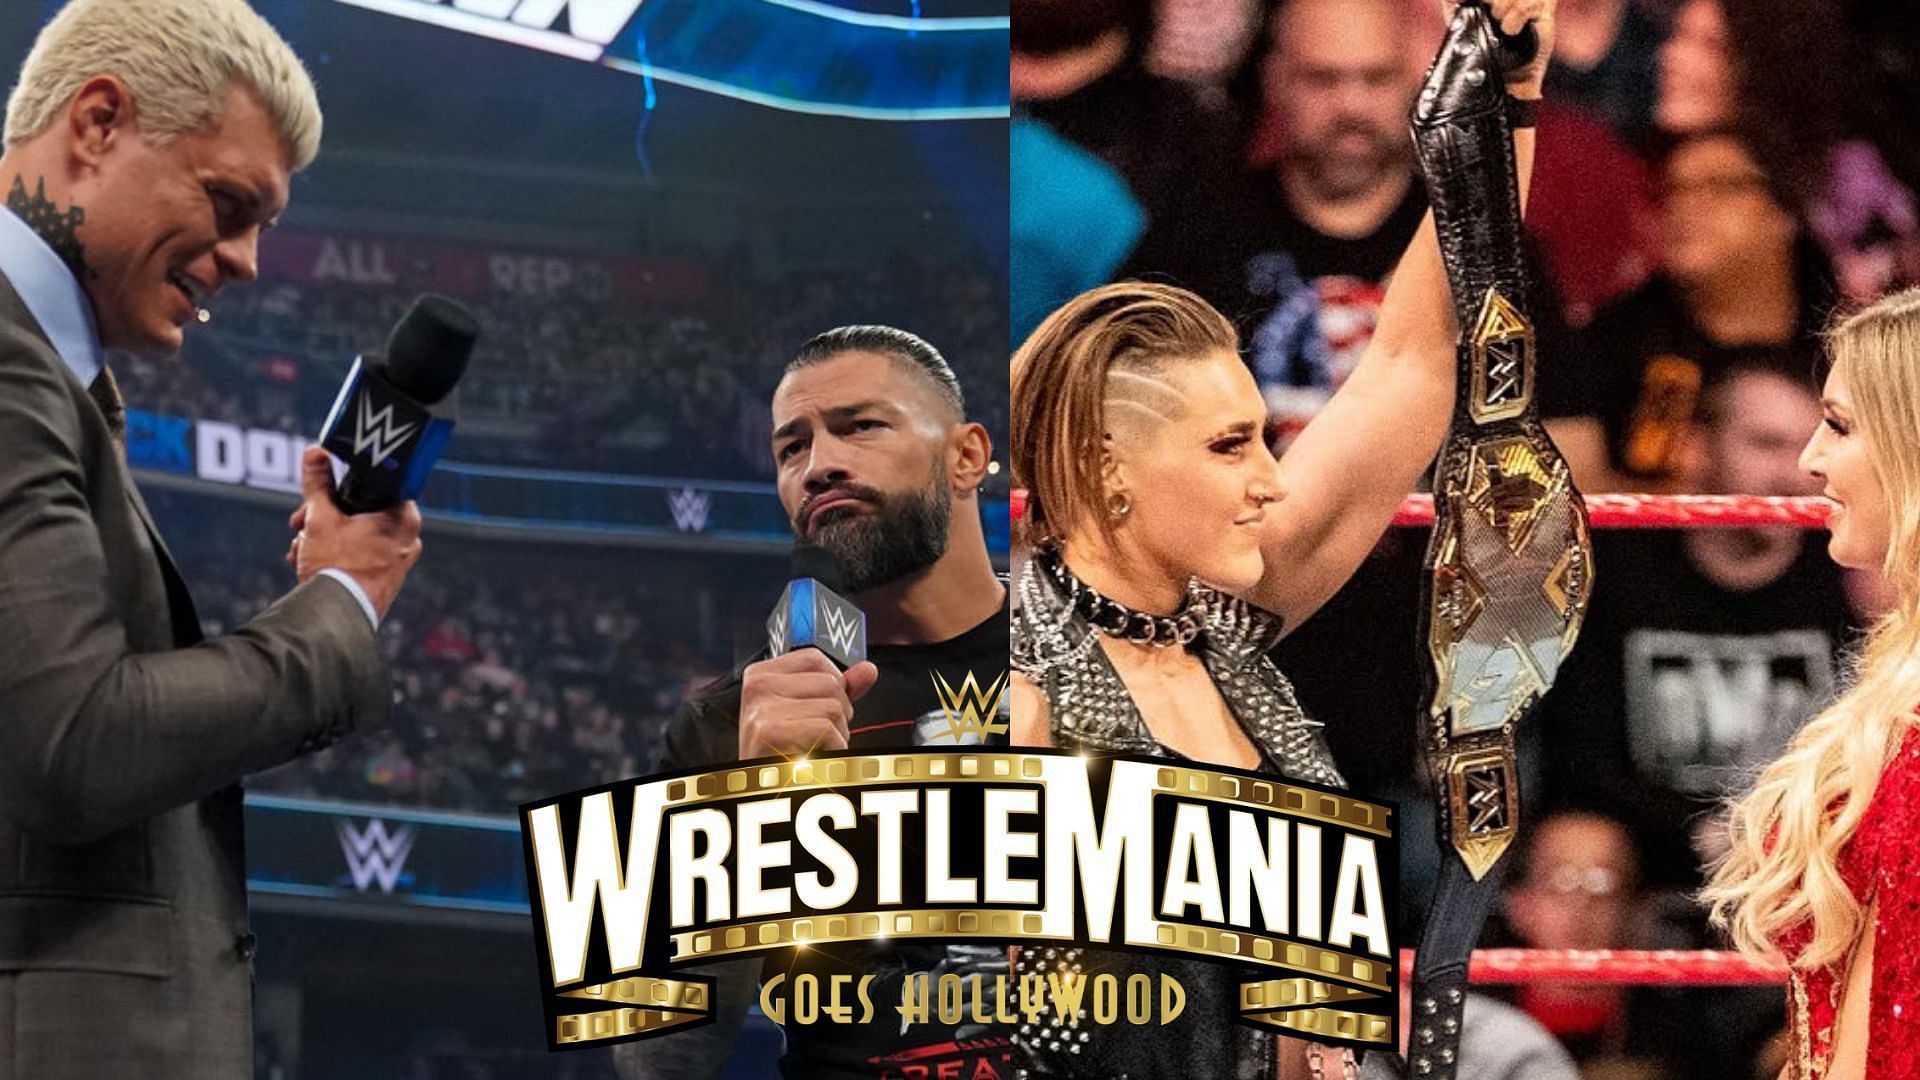 Details on how to watch WWE WrestleMania 39 